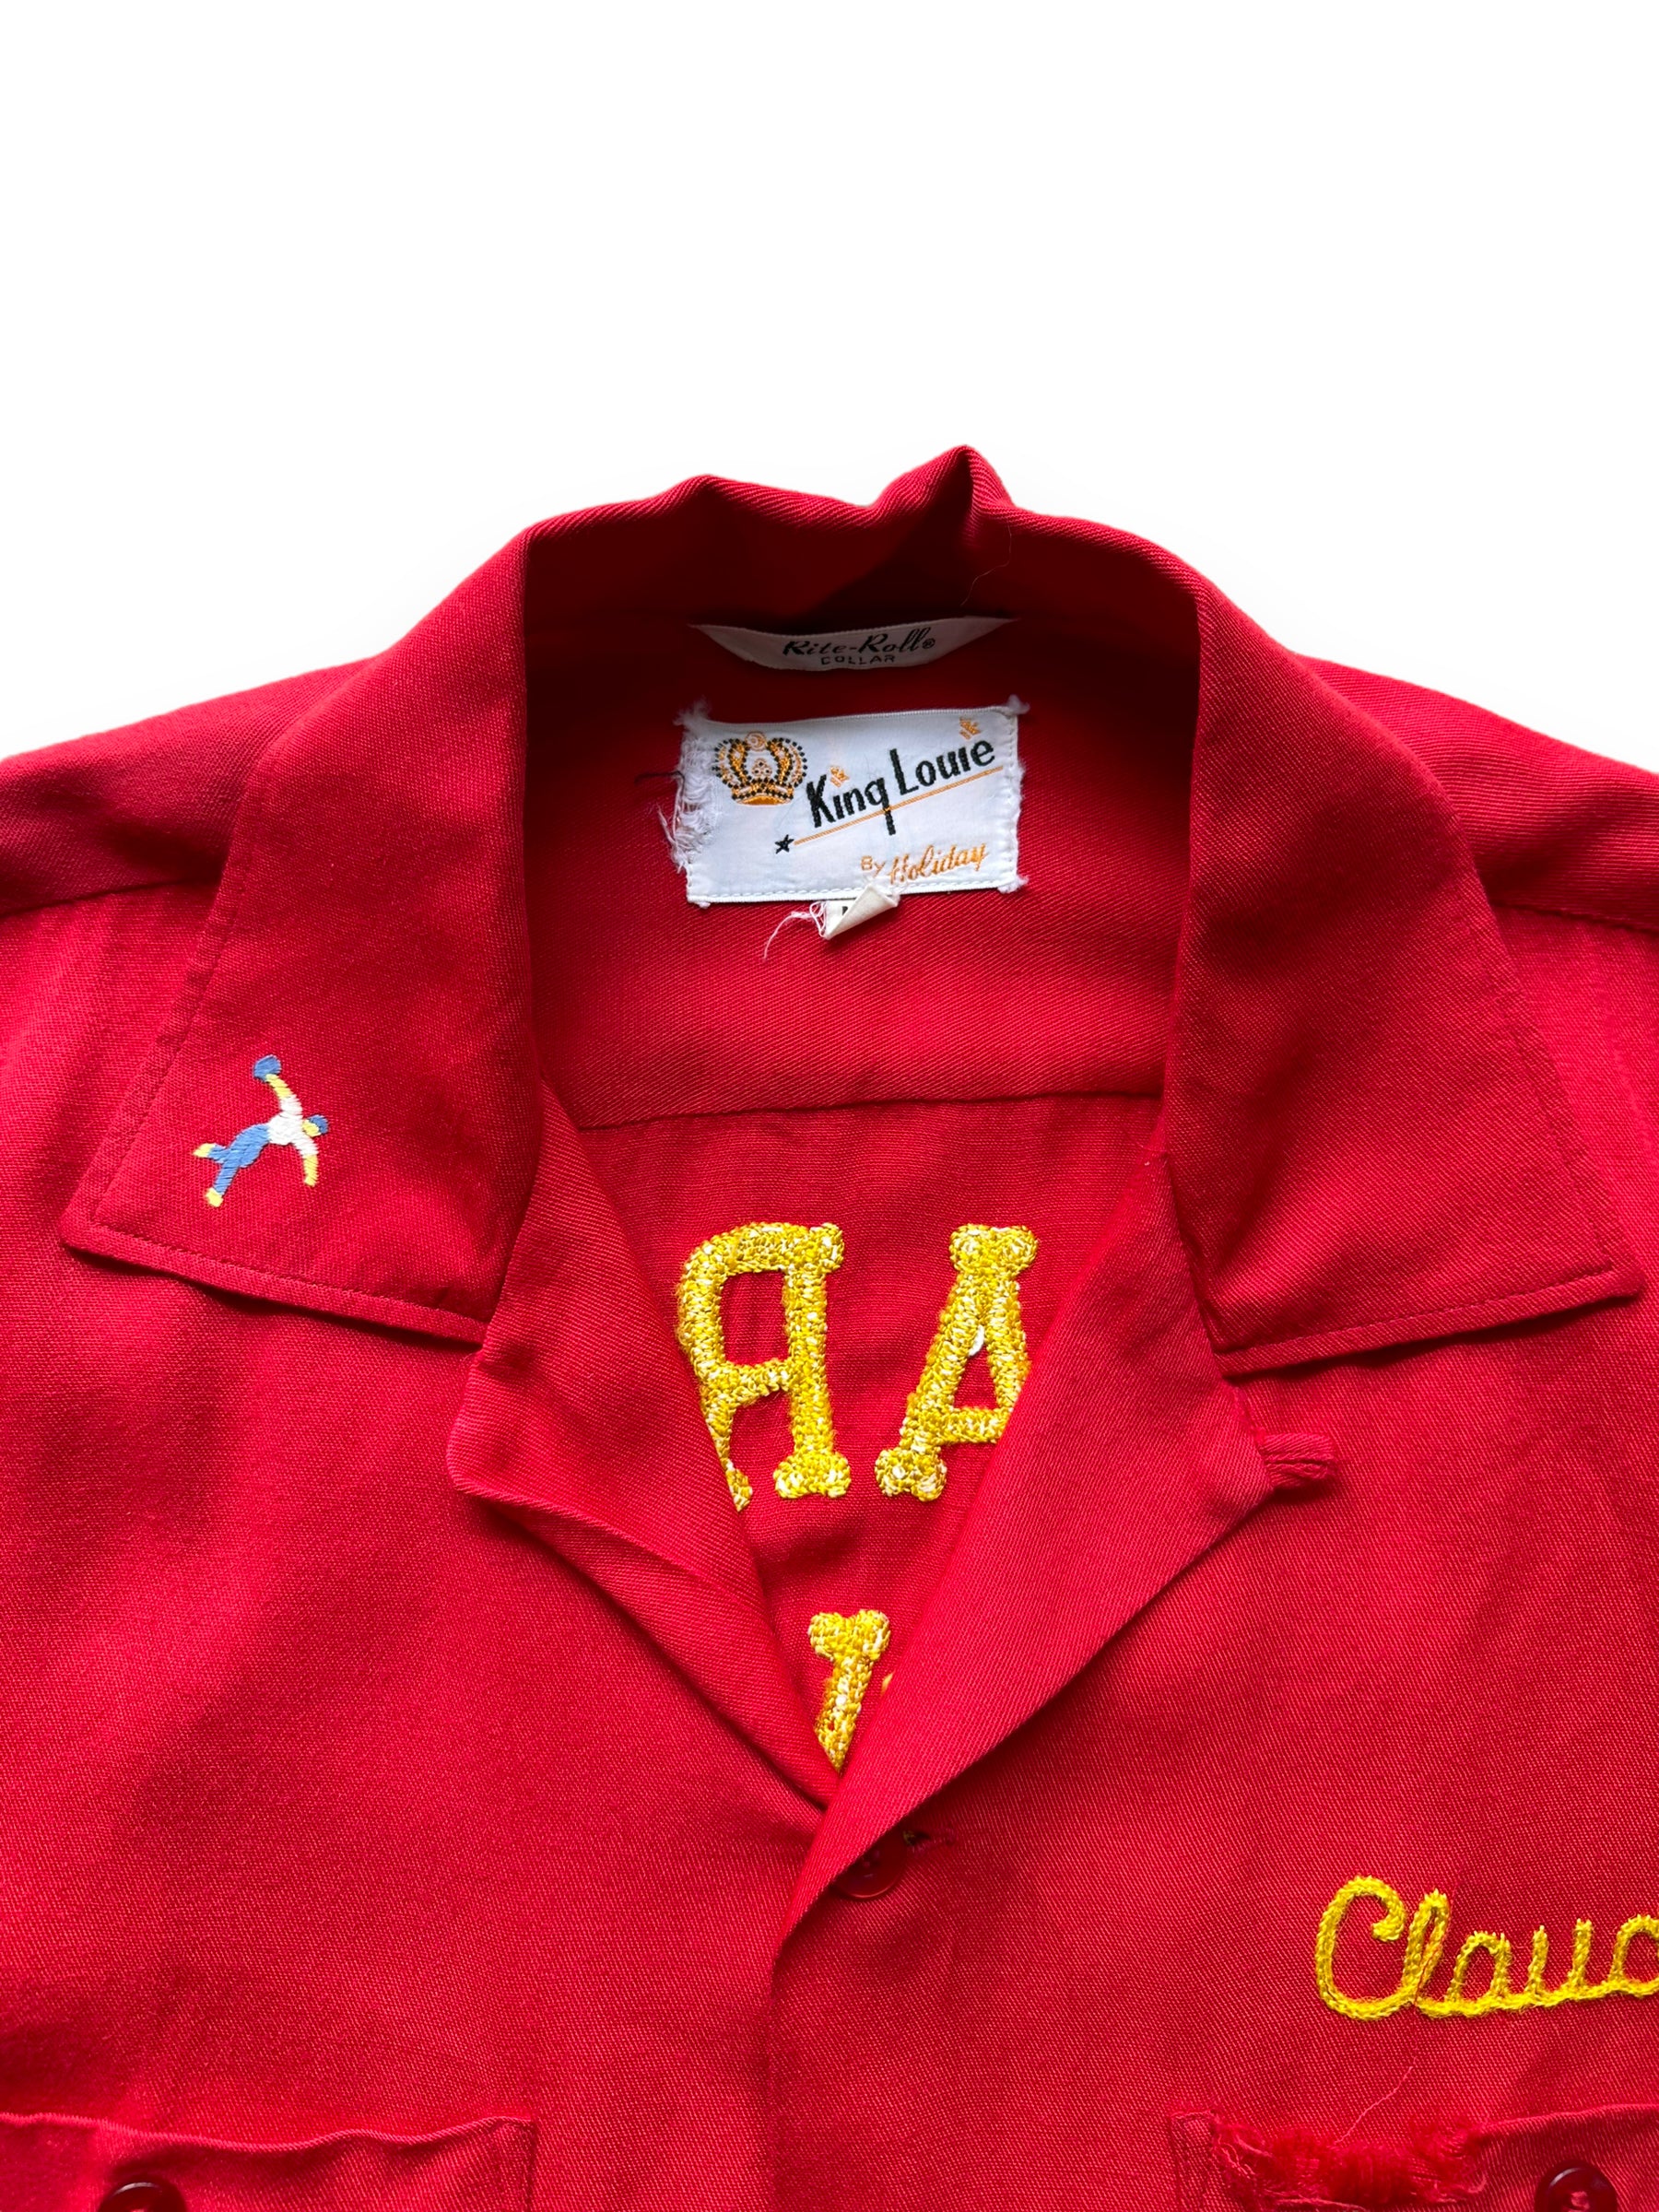 Collar of Vintage "Shearer's Service Station" Chainstitched Bowling Shirt SZ M | Vintage Bowling Shirt Seattle | Barn Owl Vintage Seattle